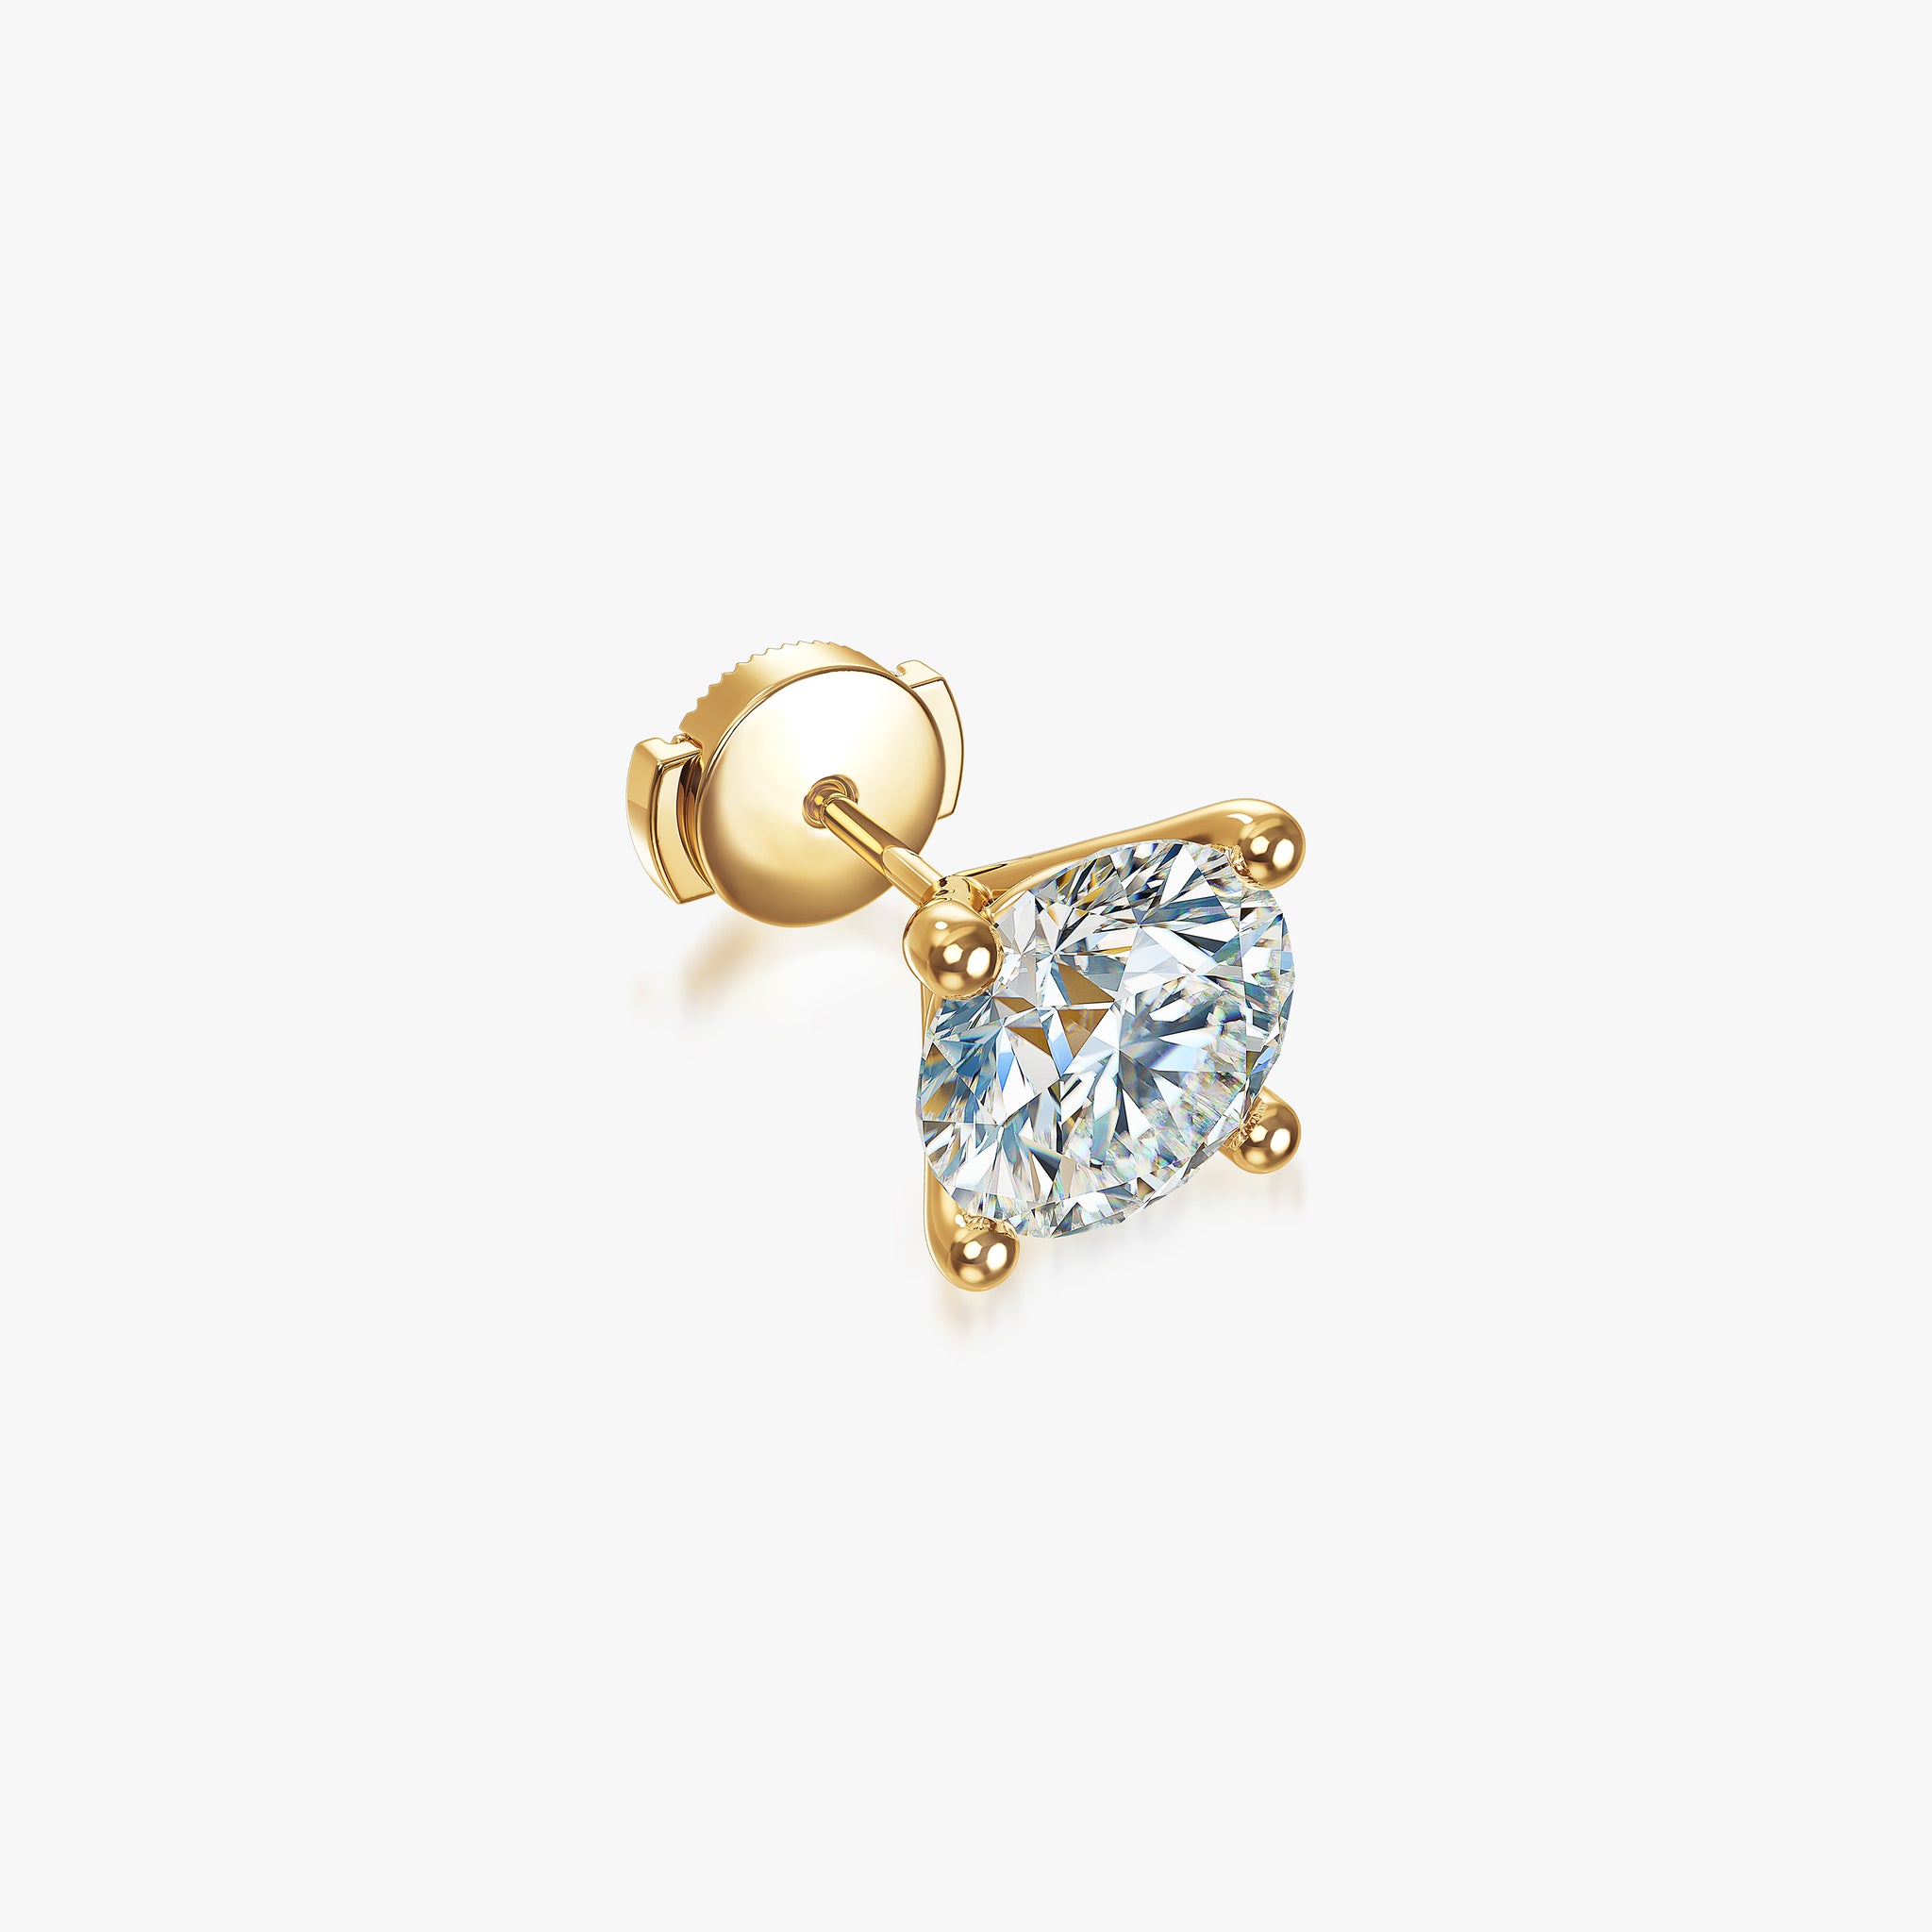 J'EVAR 18KT Yellow Gold ALTR Lab Grown Diamond Single Stud Earring with Guardian Backs Perspective View